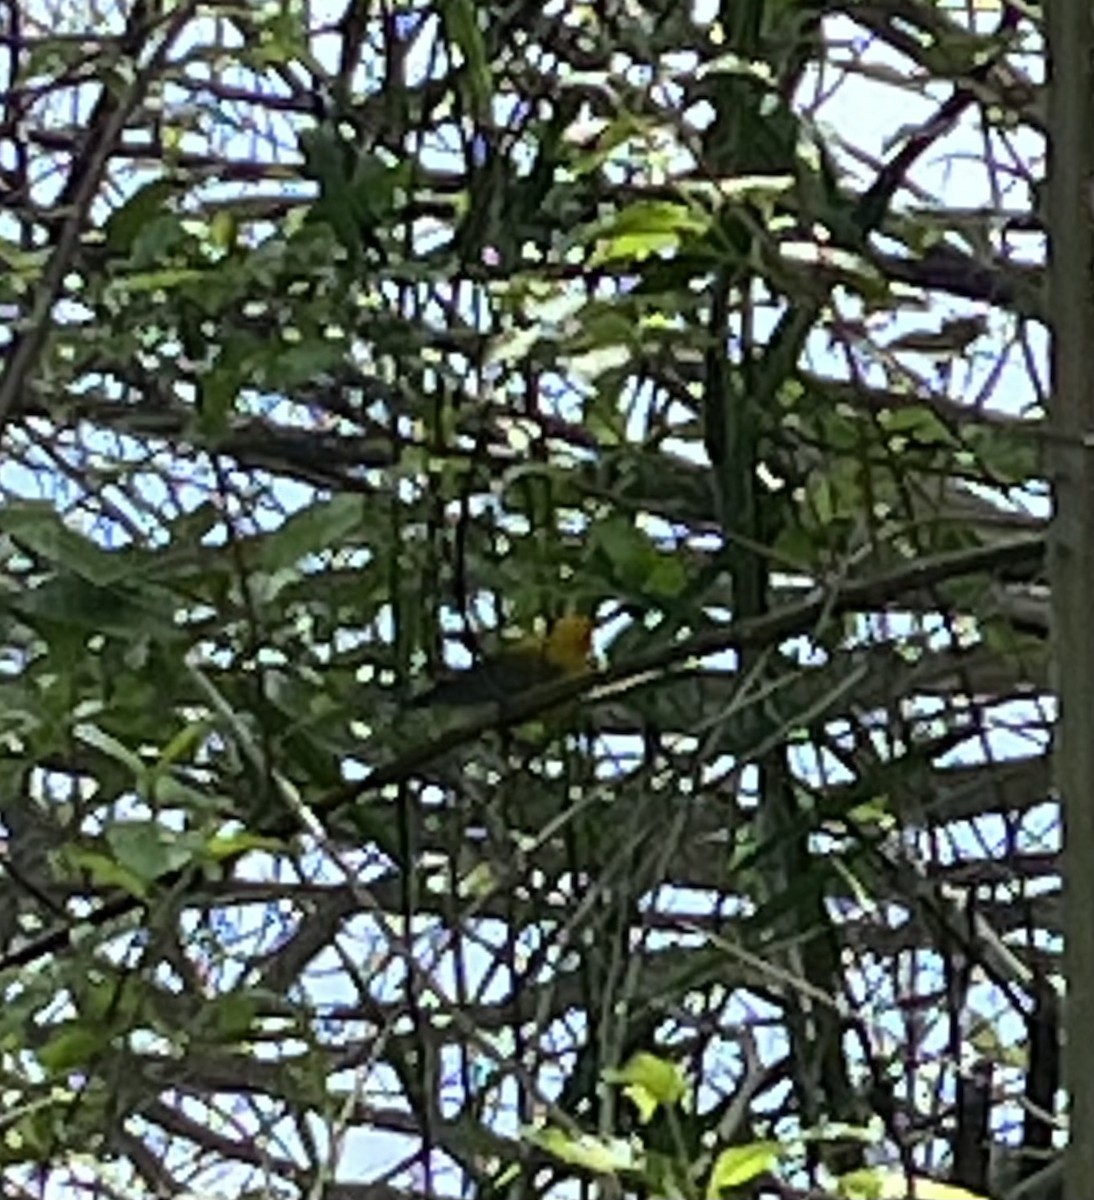 Prothonotary Warbler - D Brewer